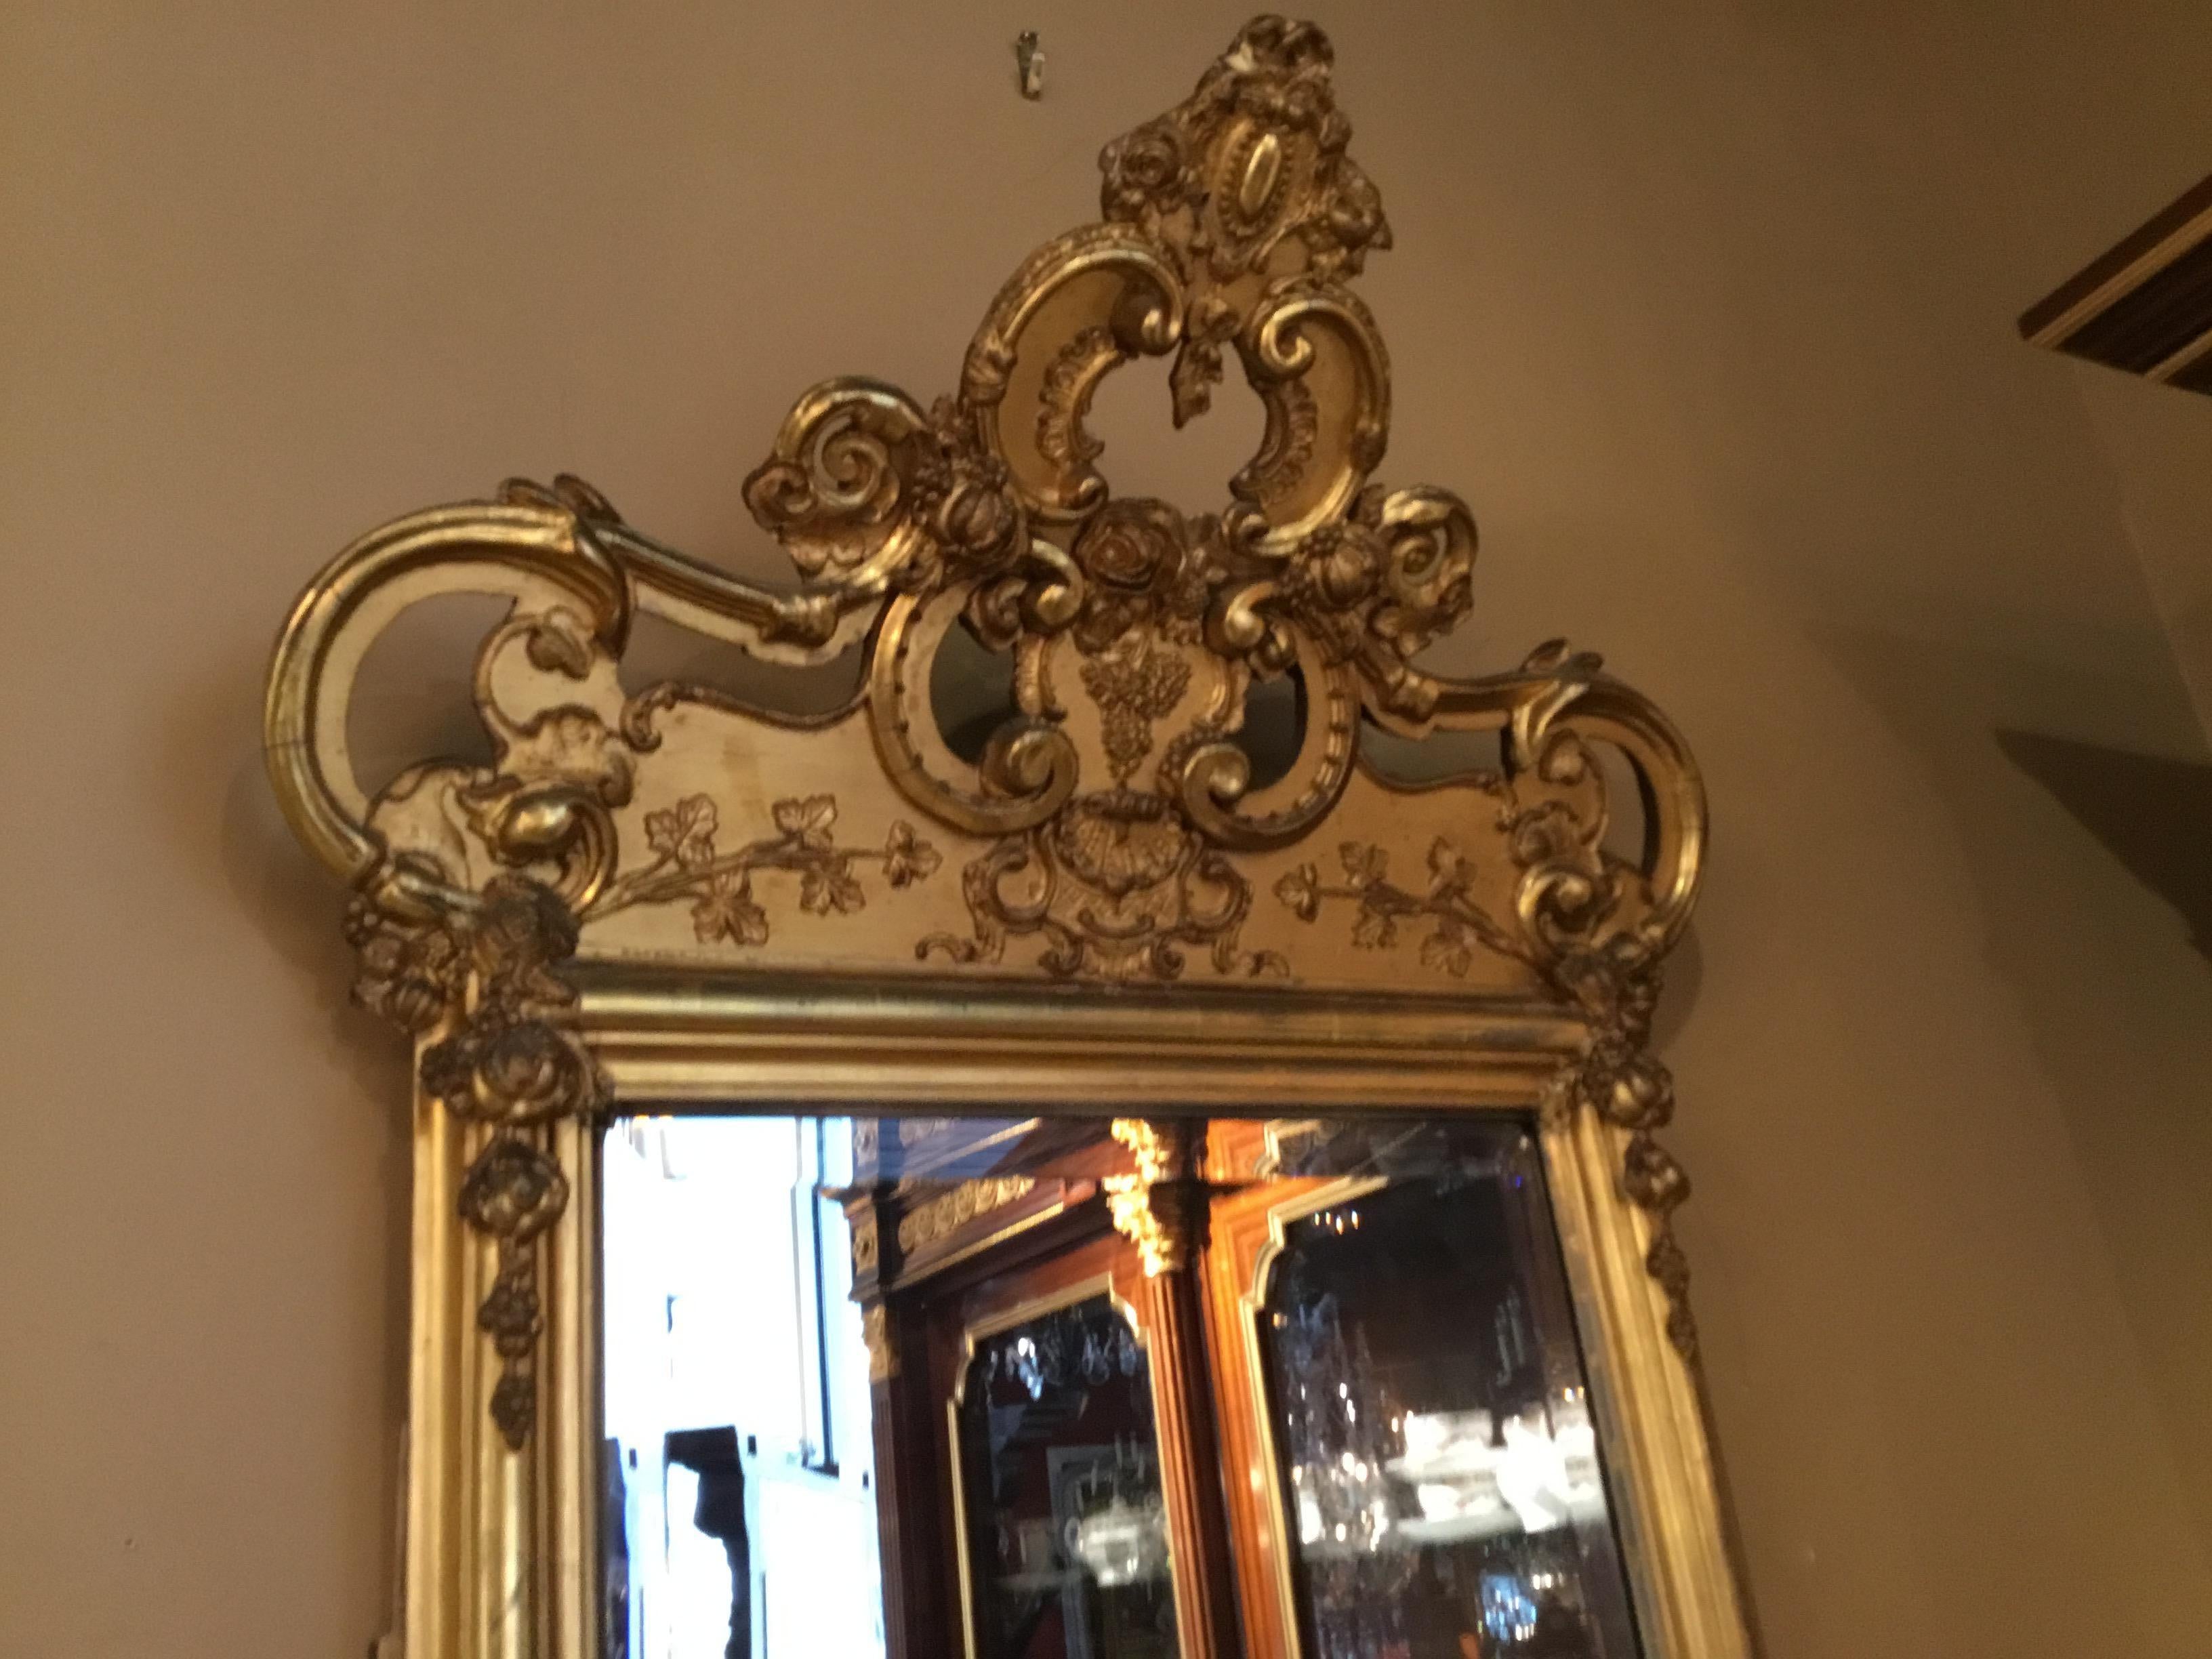 Lovely old original giltwood with antique patina. The top crest bends gently forward in design.
Fruit and foliate carvings decorate this exceptional mirror.